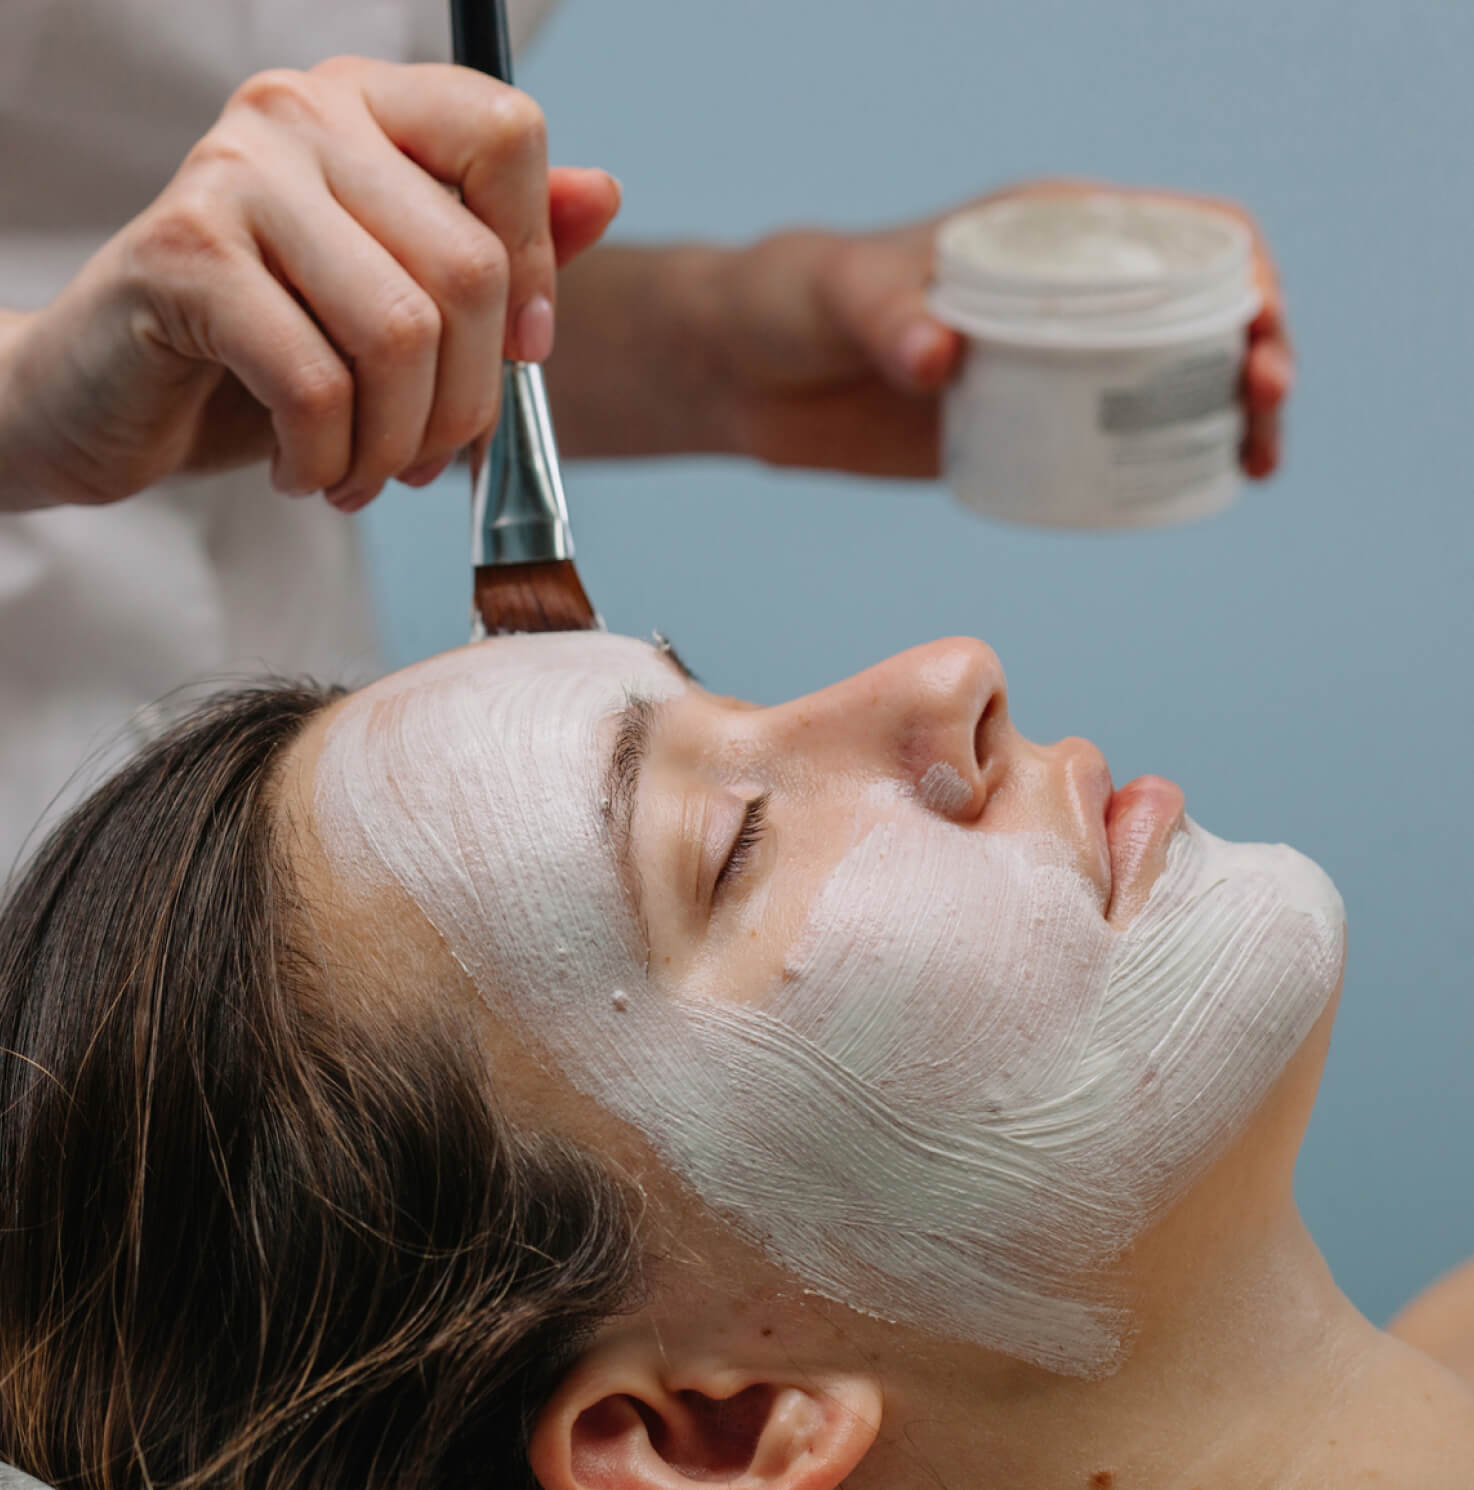 Esthetician insurance designed to protect your business